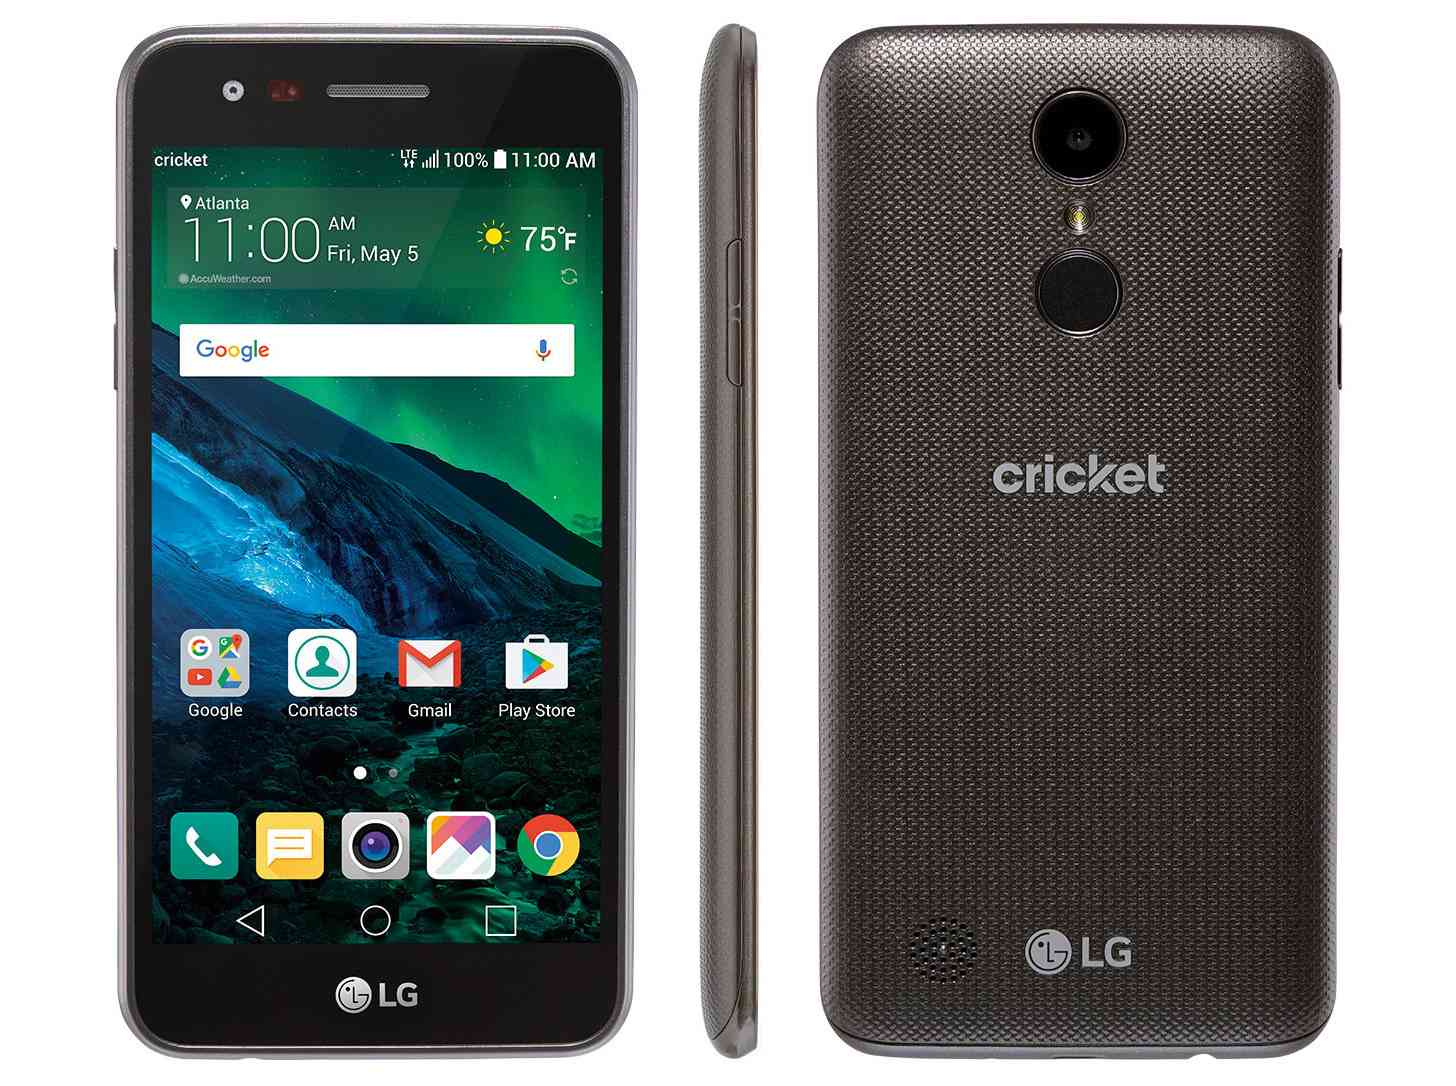 LG Fortune Cricket Wireless Android smartphone official